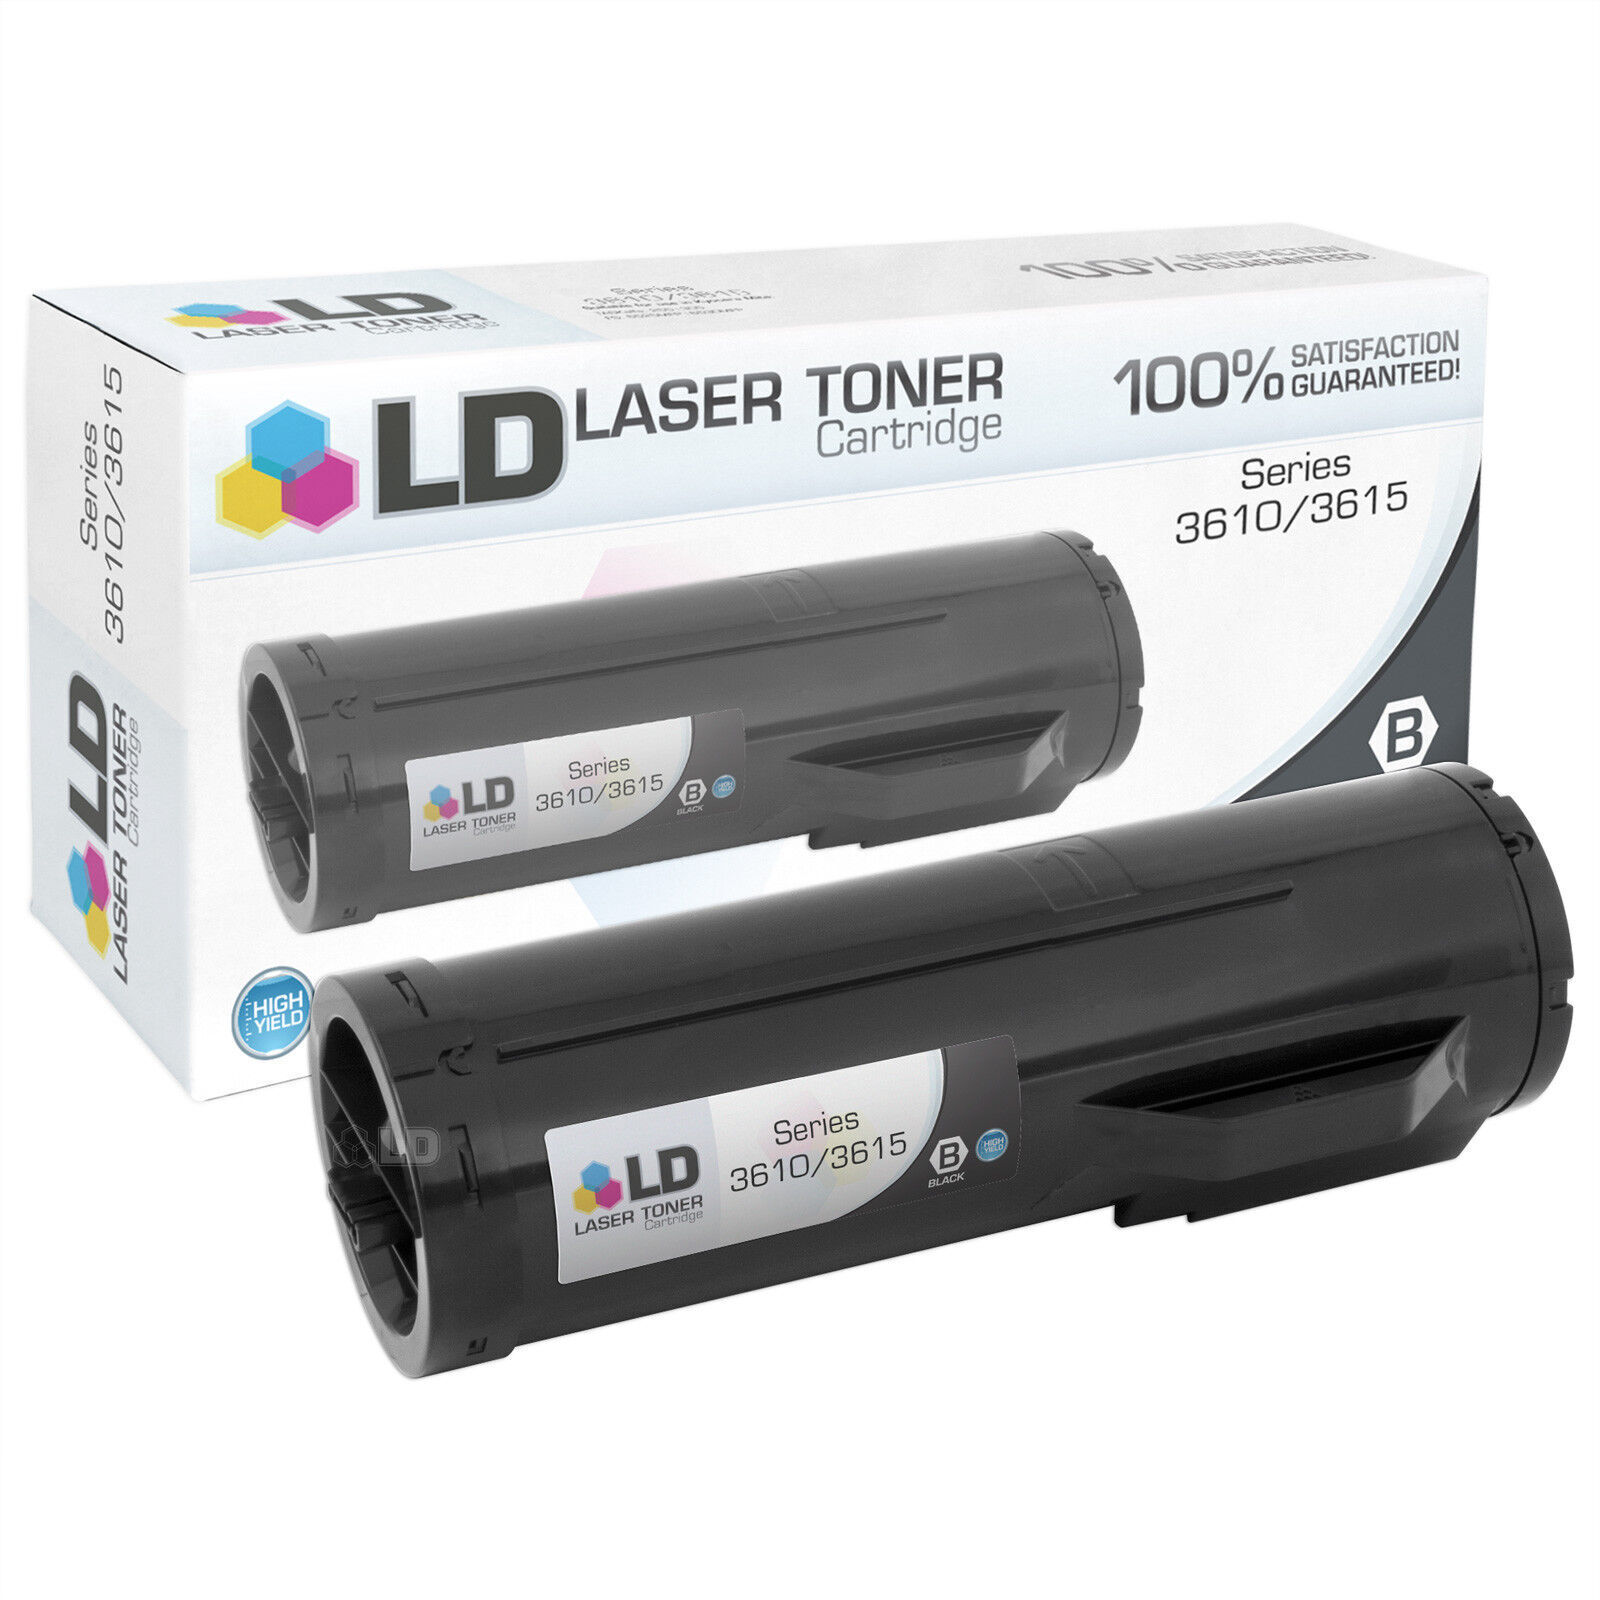 LD Compatible Xerox 106R02722 HY Black Toner Cartridge for 3610/3615